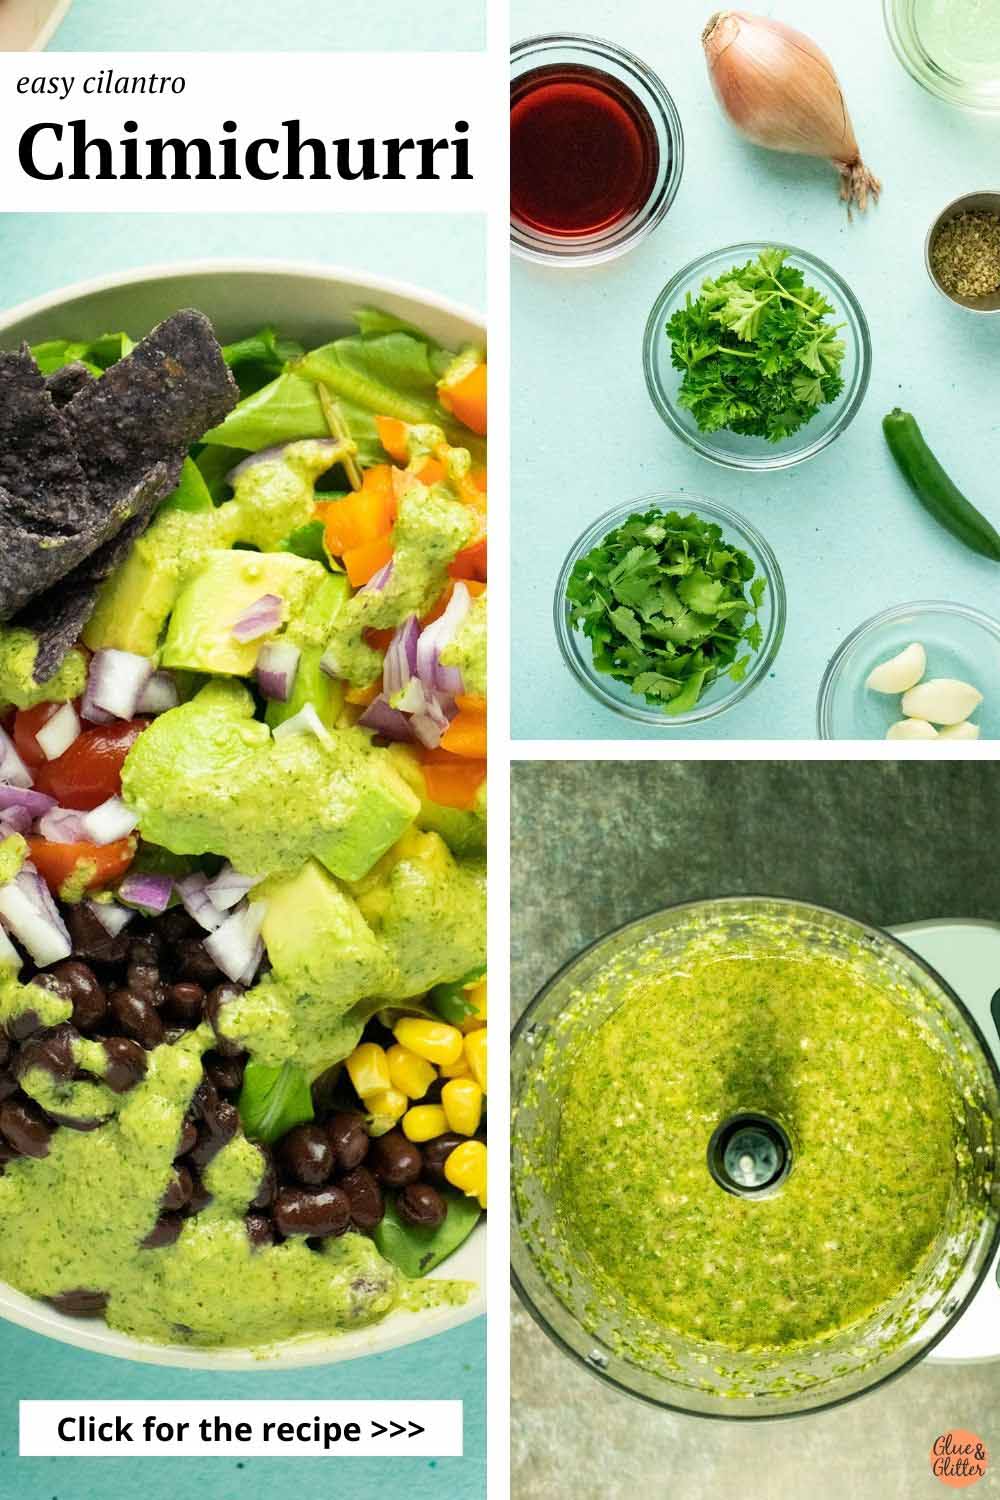 image collage showing chimichurri sauce on a salad, the ingredients, and the sauce in the food processor